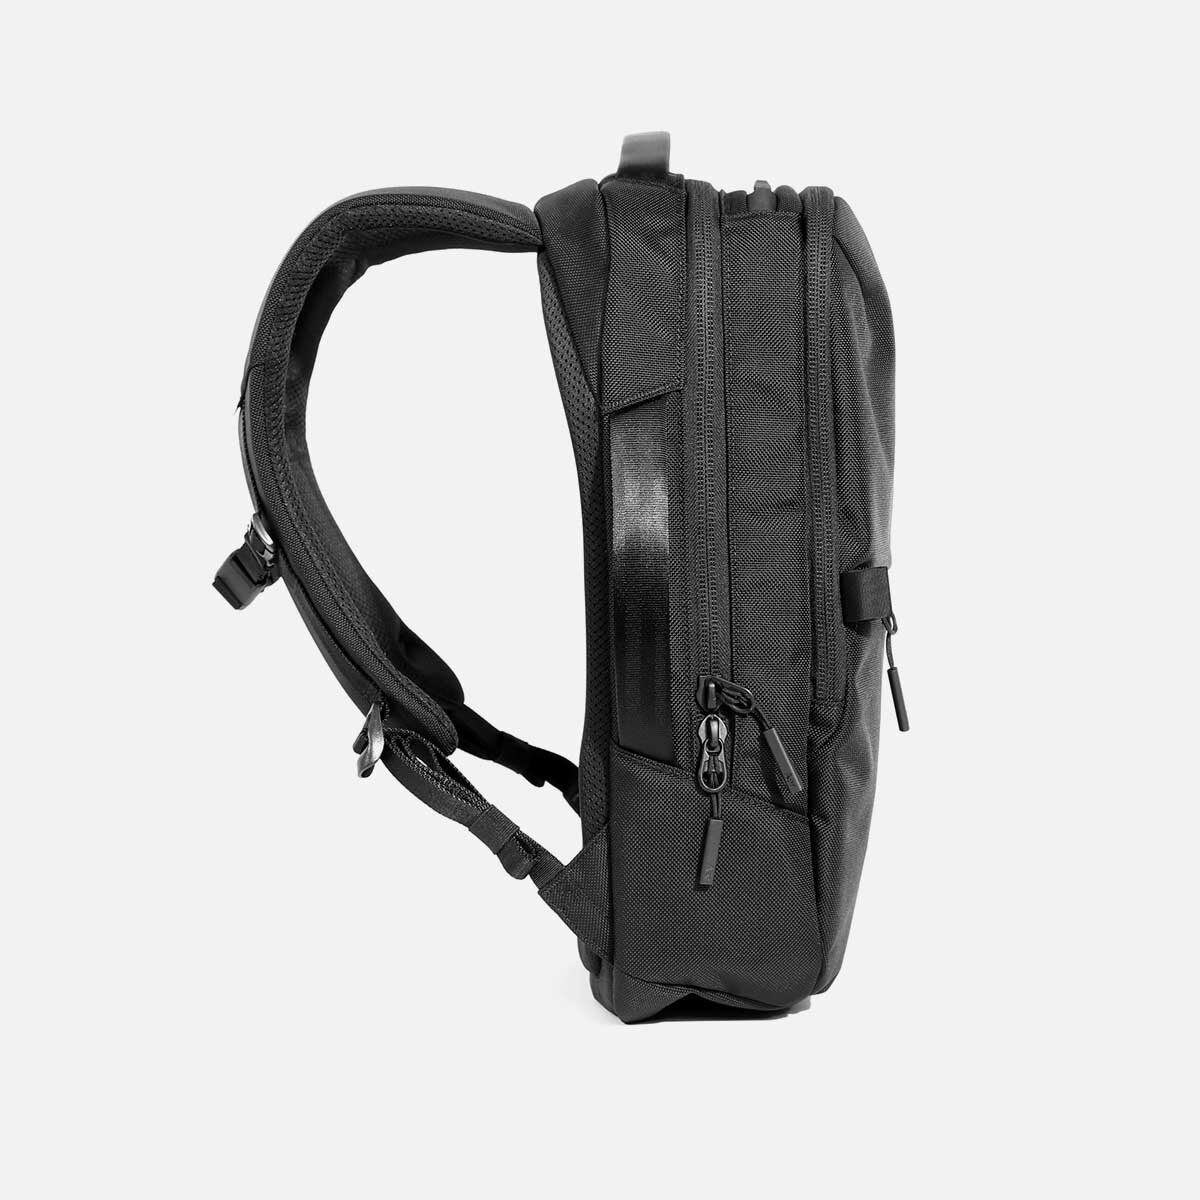 City Pack - Black — Aer | Modern gym bags, travel backpacks and